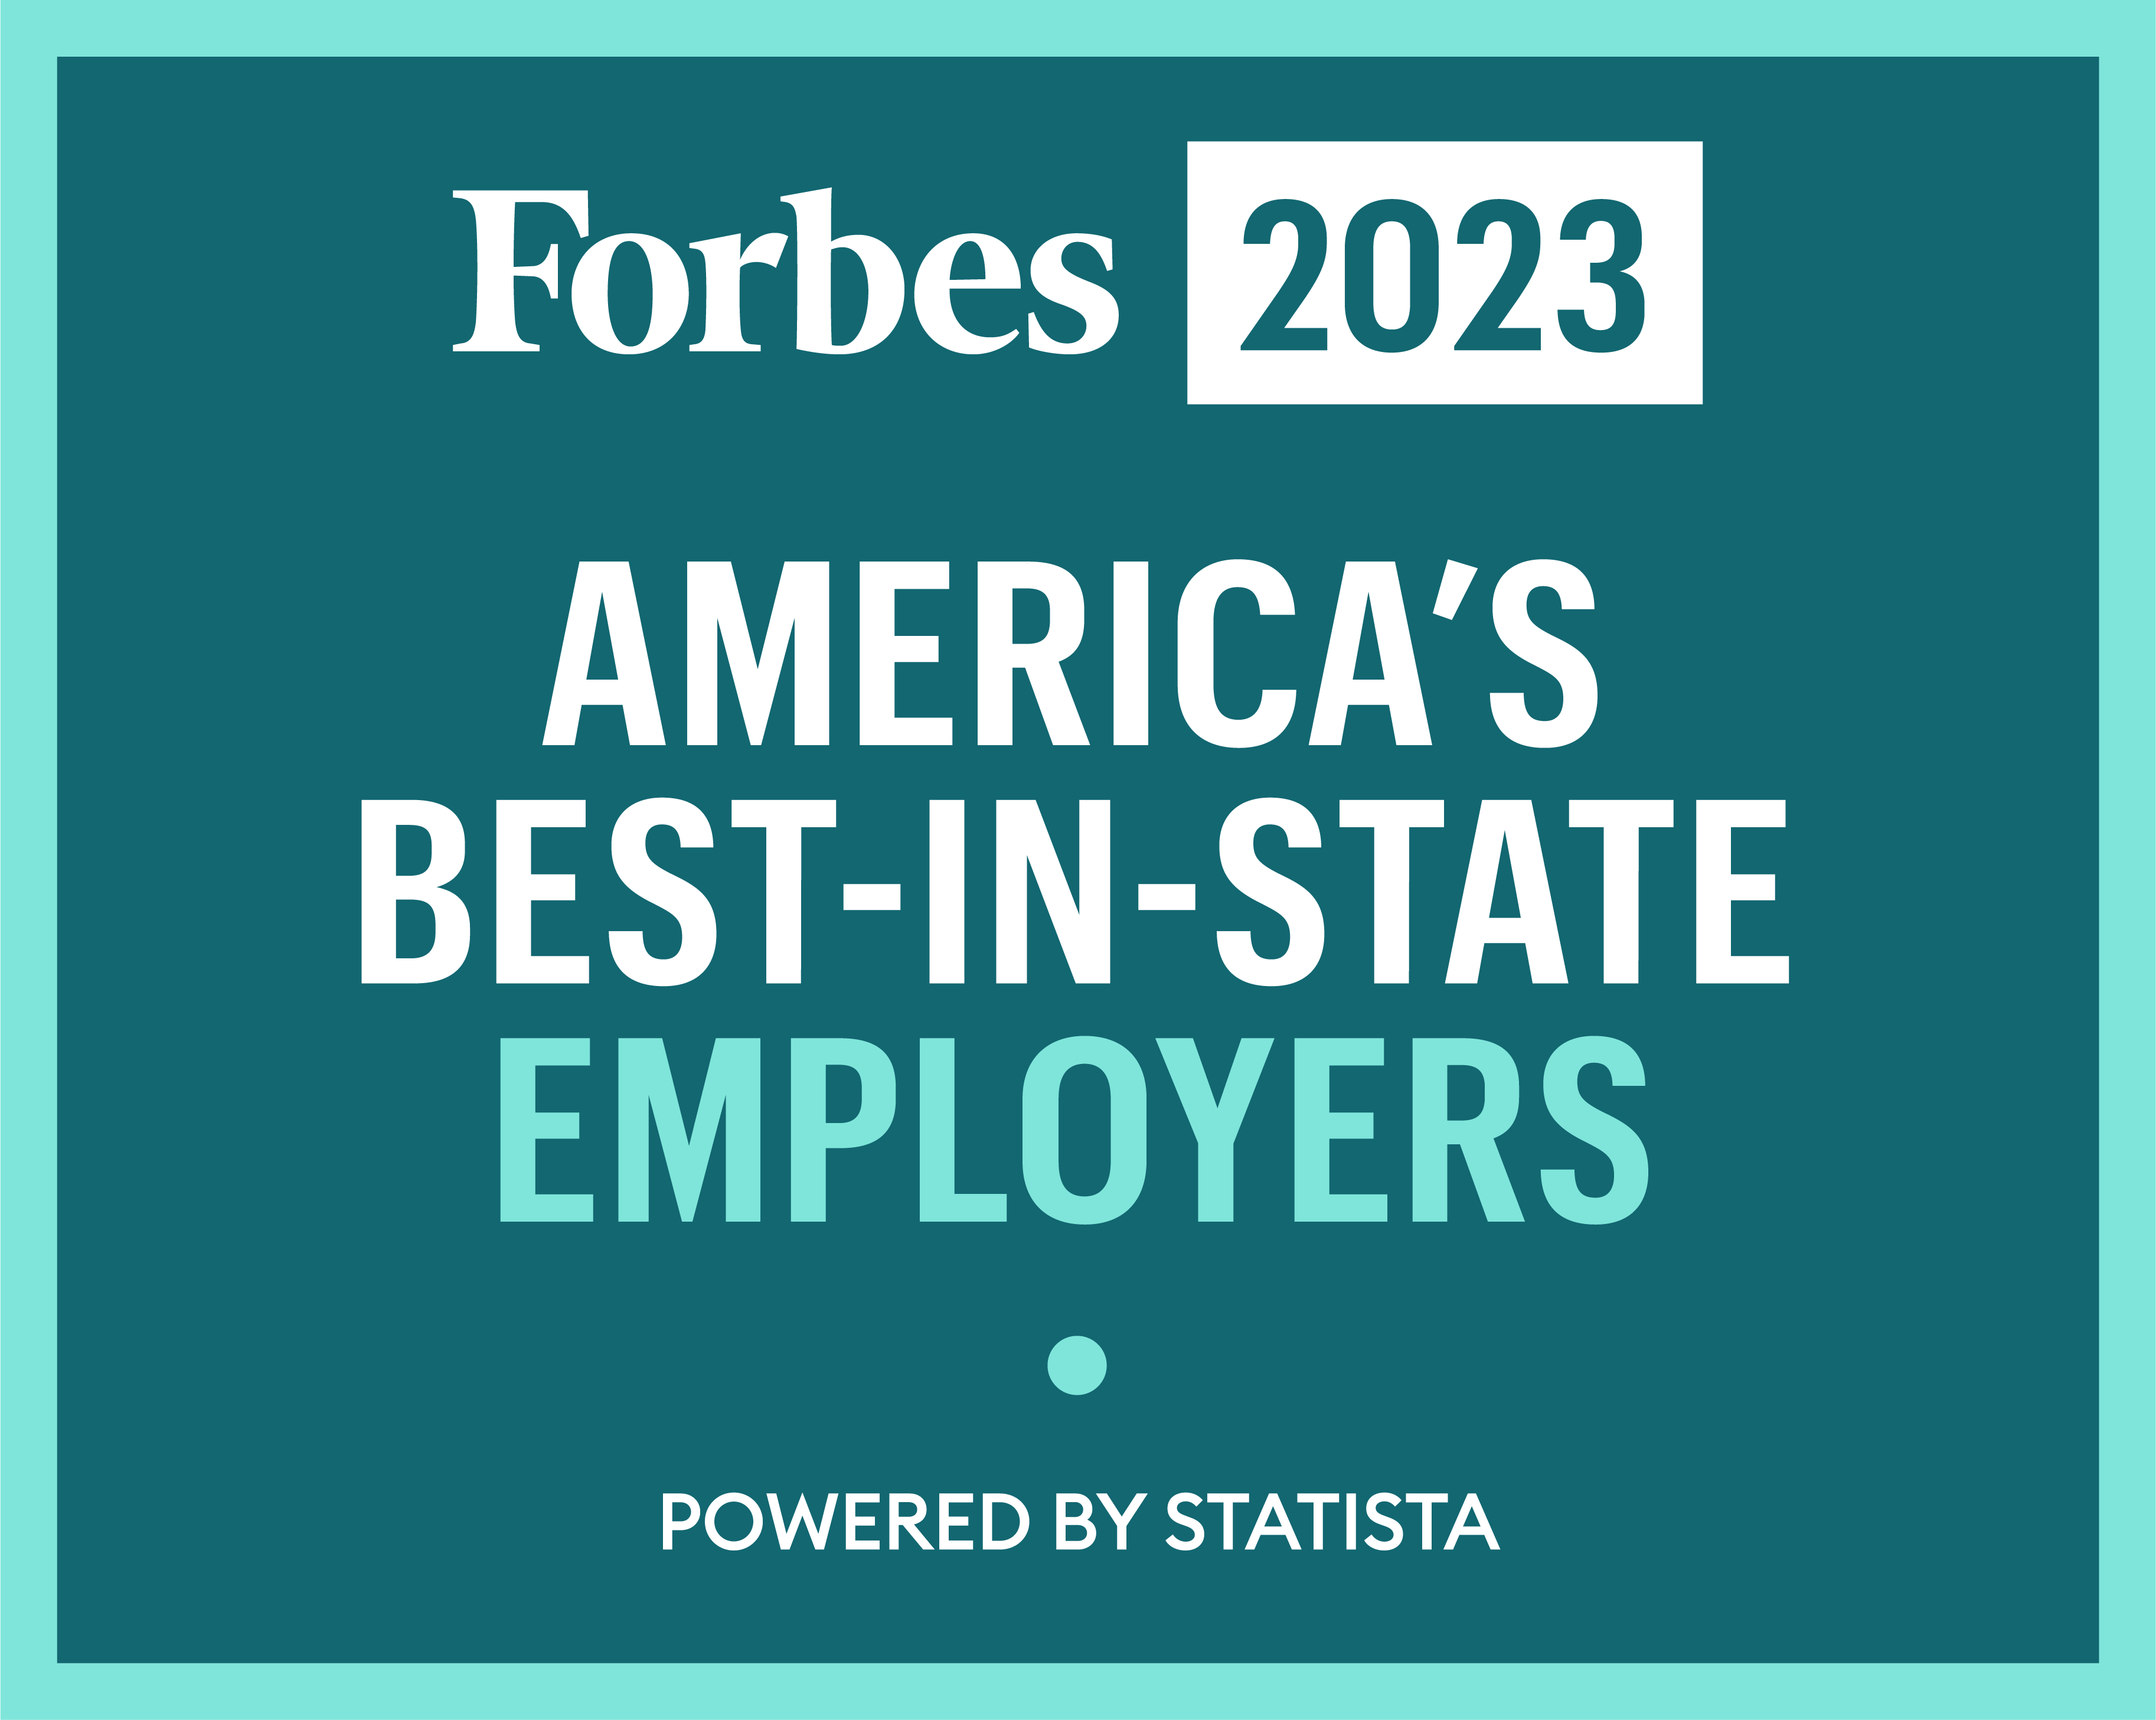 Forbes 2023 America's Best-in-State Employers